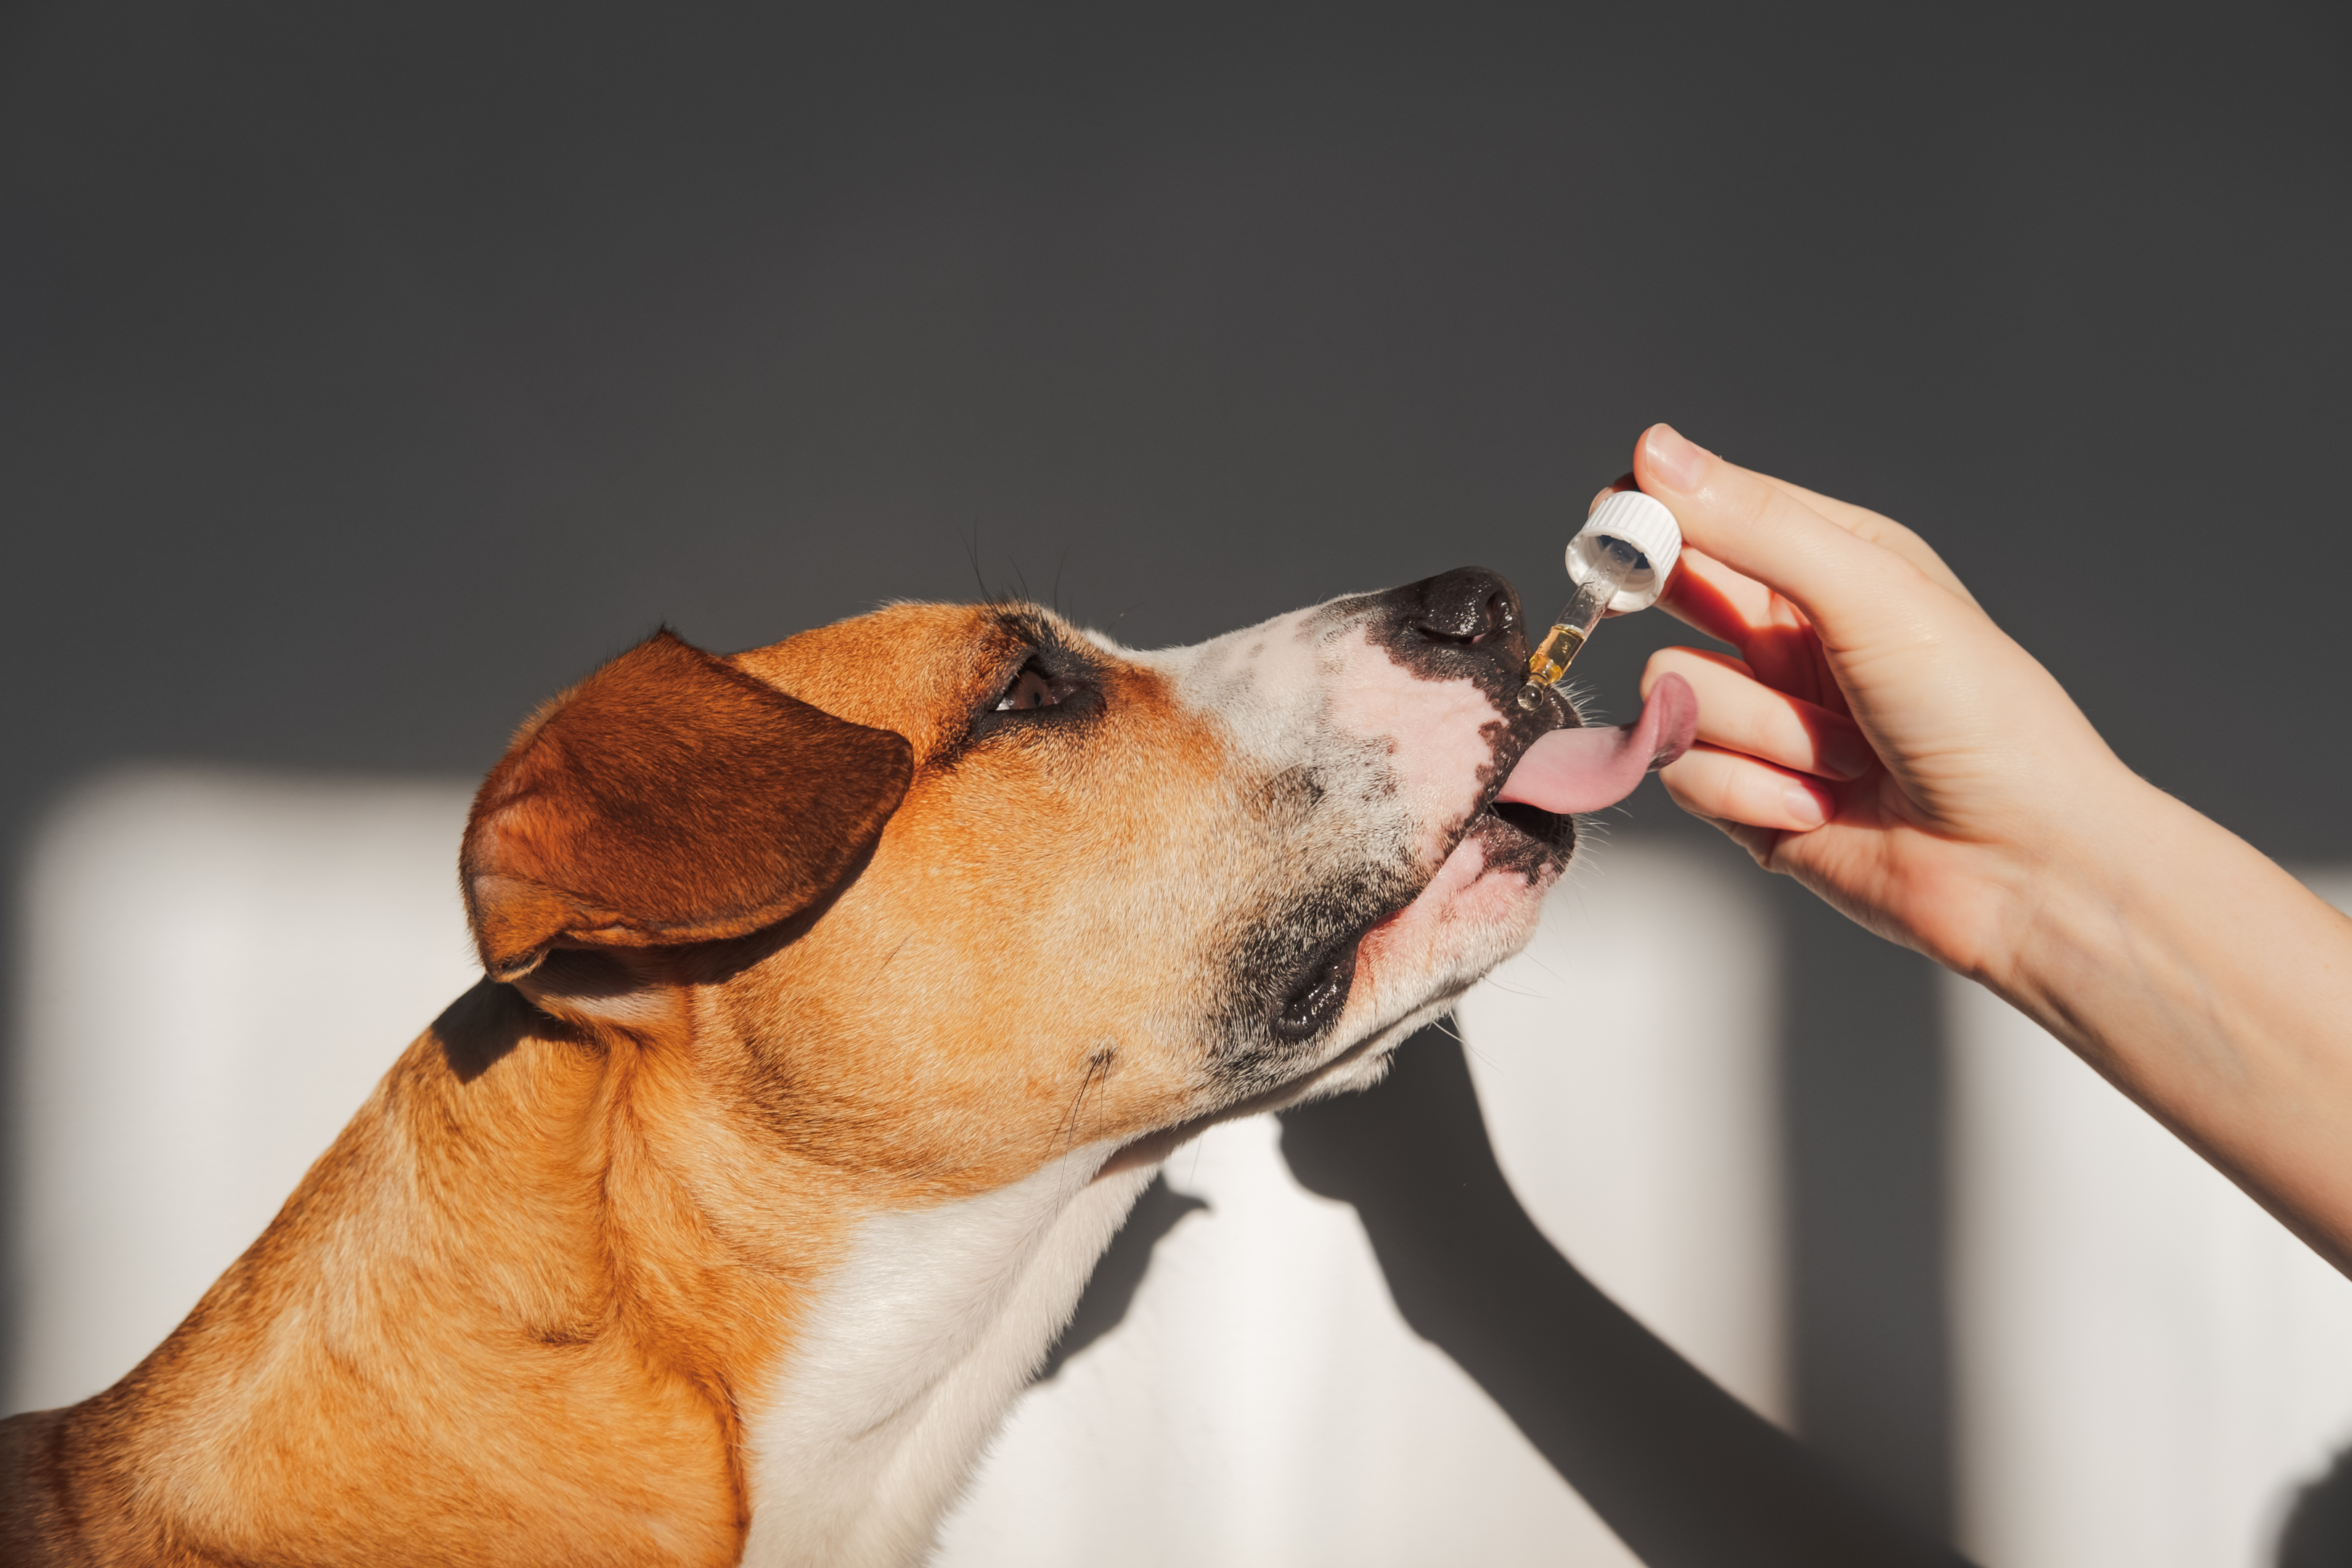 A large brown tan and white dog licking CBD oil from a pipette